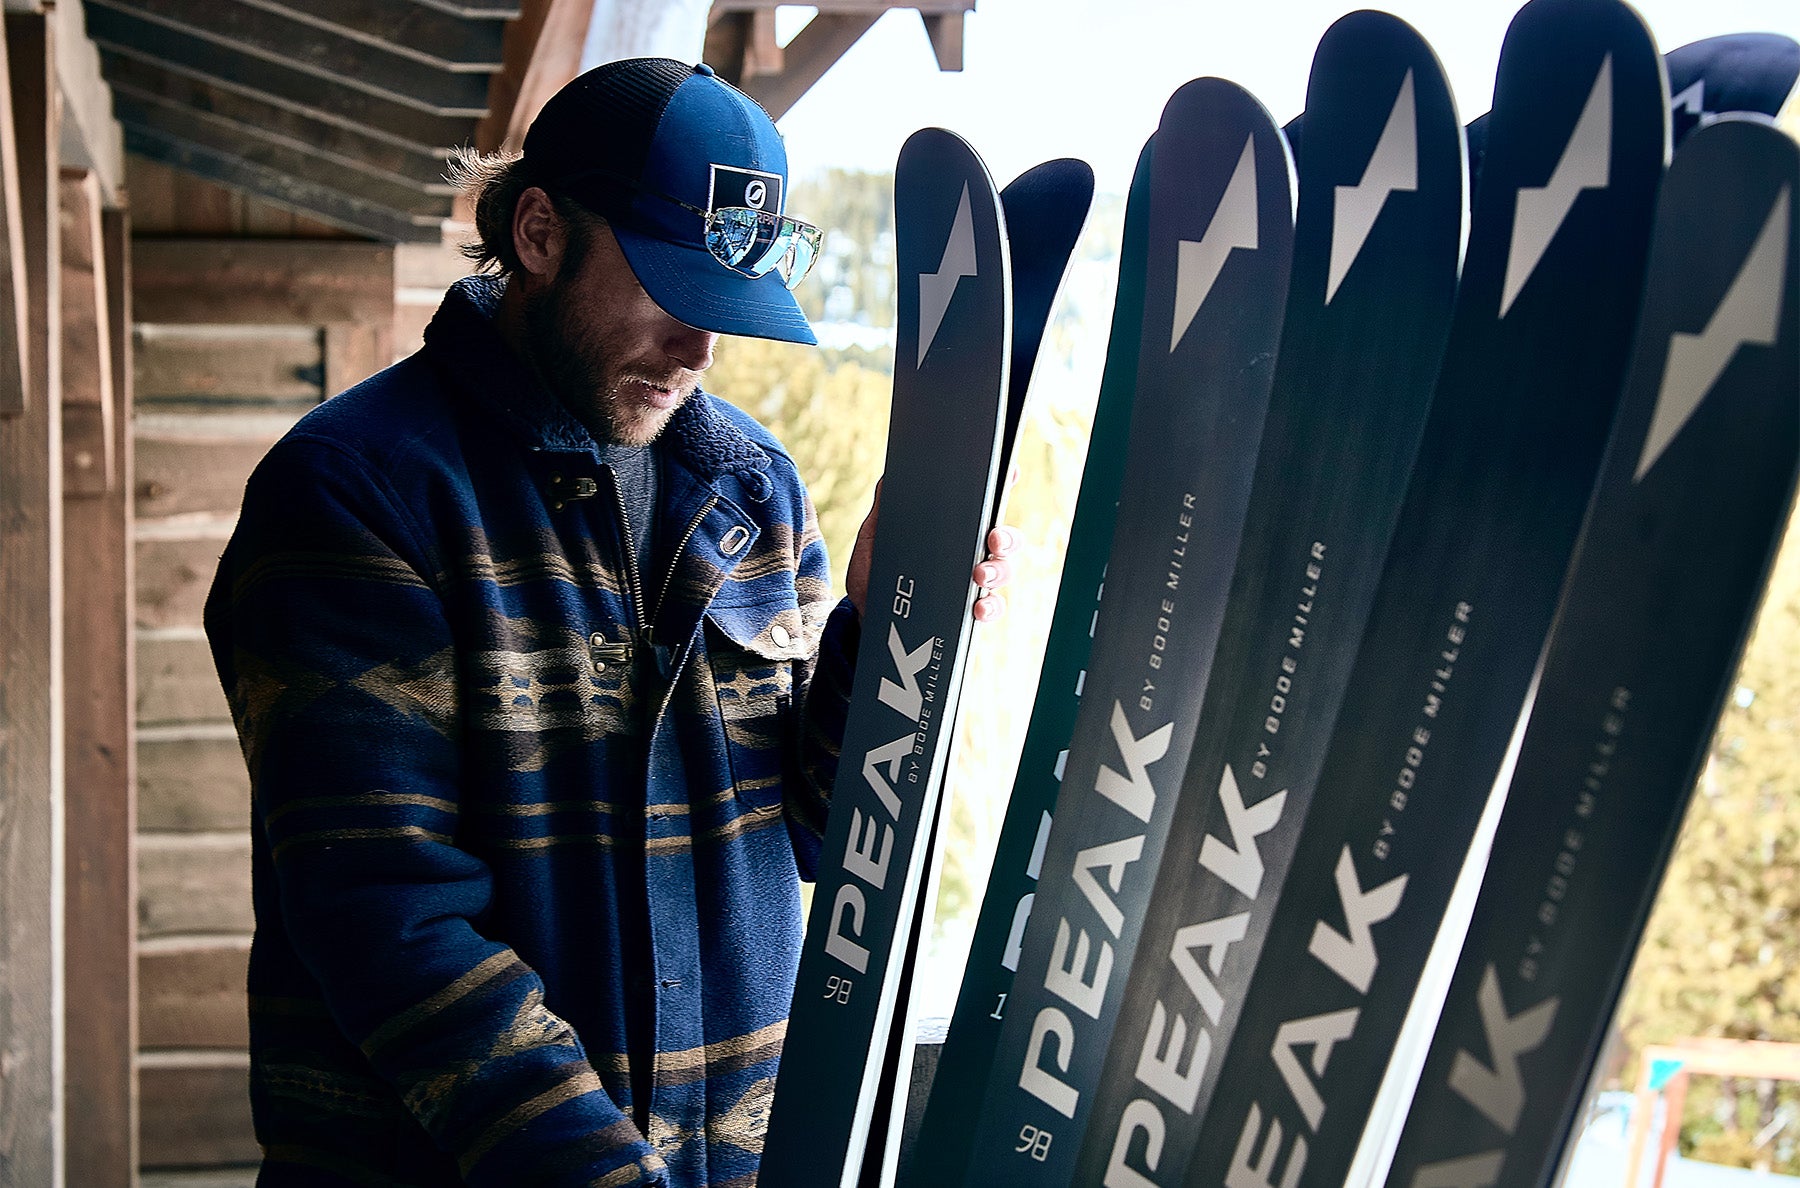 Bode Miller with the Peak Ski Company lineup